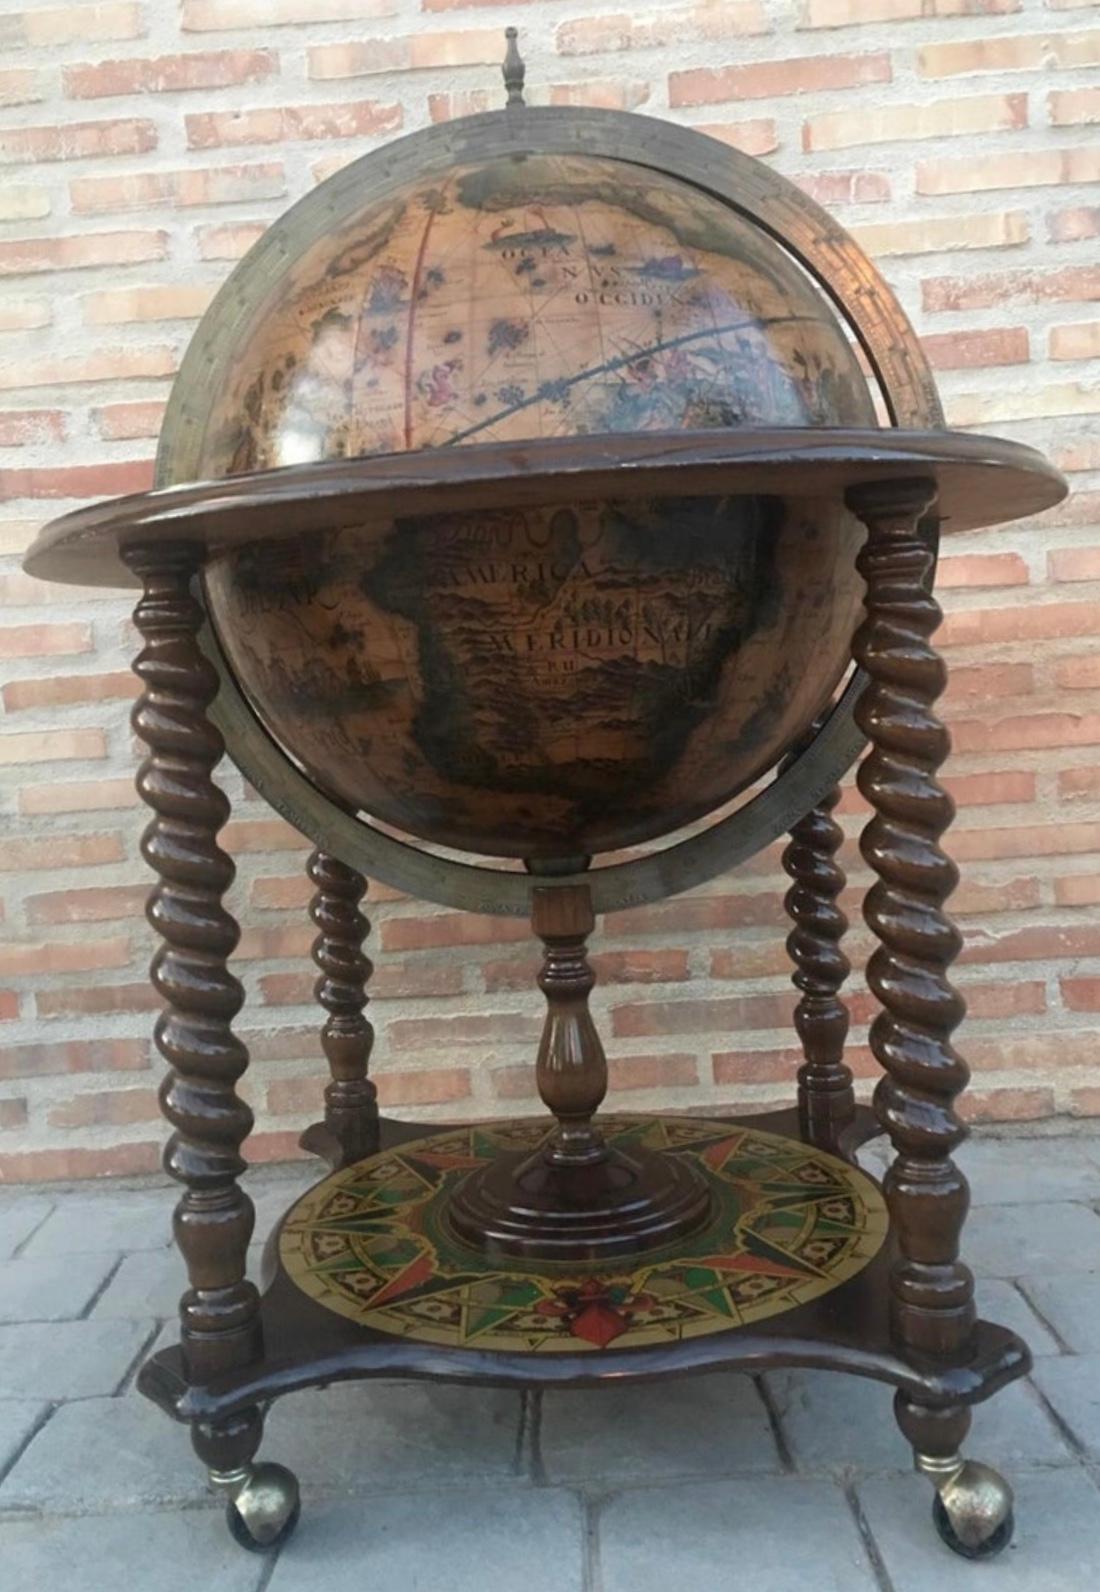 This is a modernist midcentury cocktail drinks cabinet in the form of a globe, circa 1940 in date. The hinged top section opens to reveal a fitted interior with spaces for glasses and a ice bucket. The exterior of the globe has the map of the world.